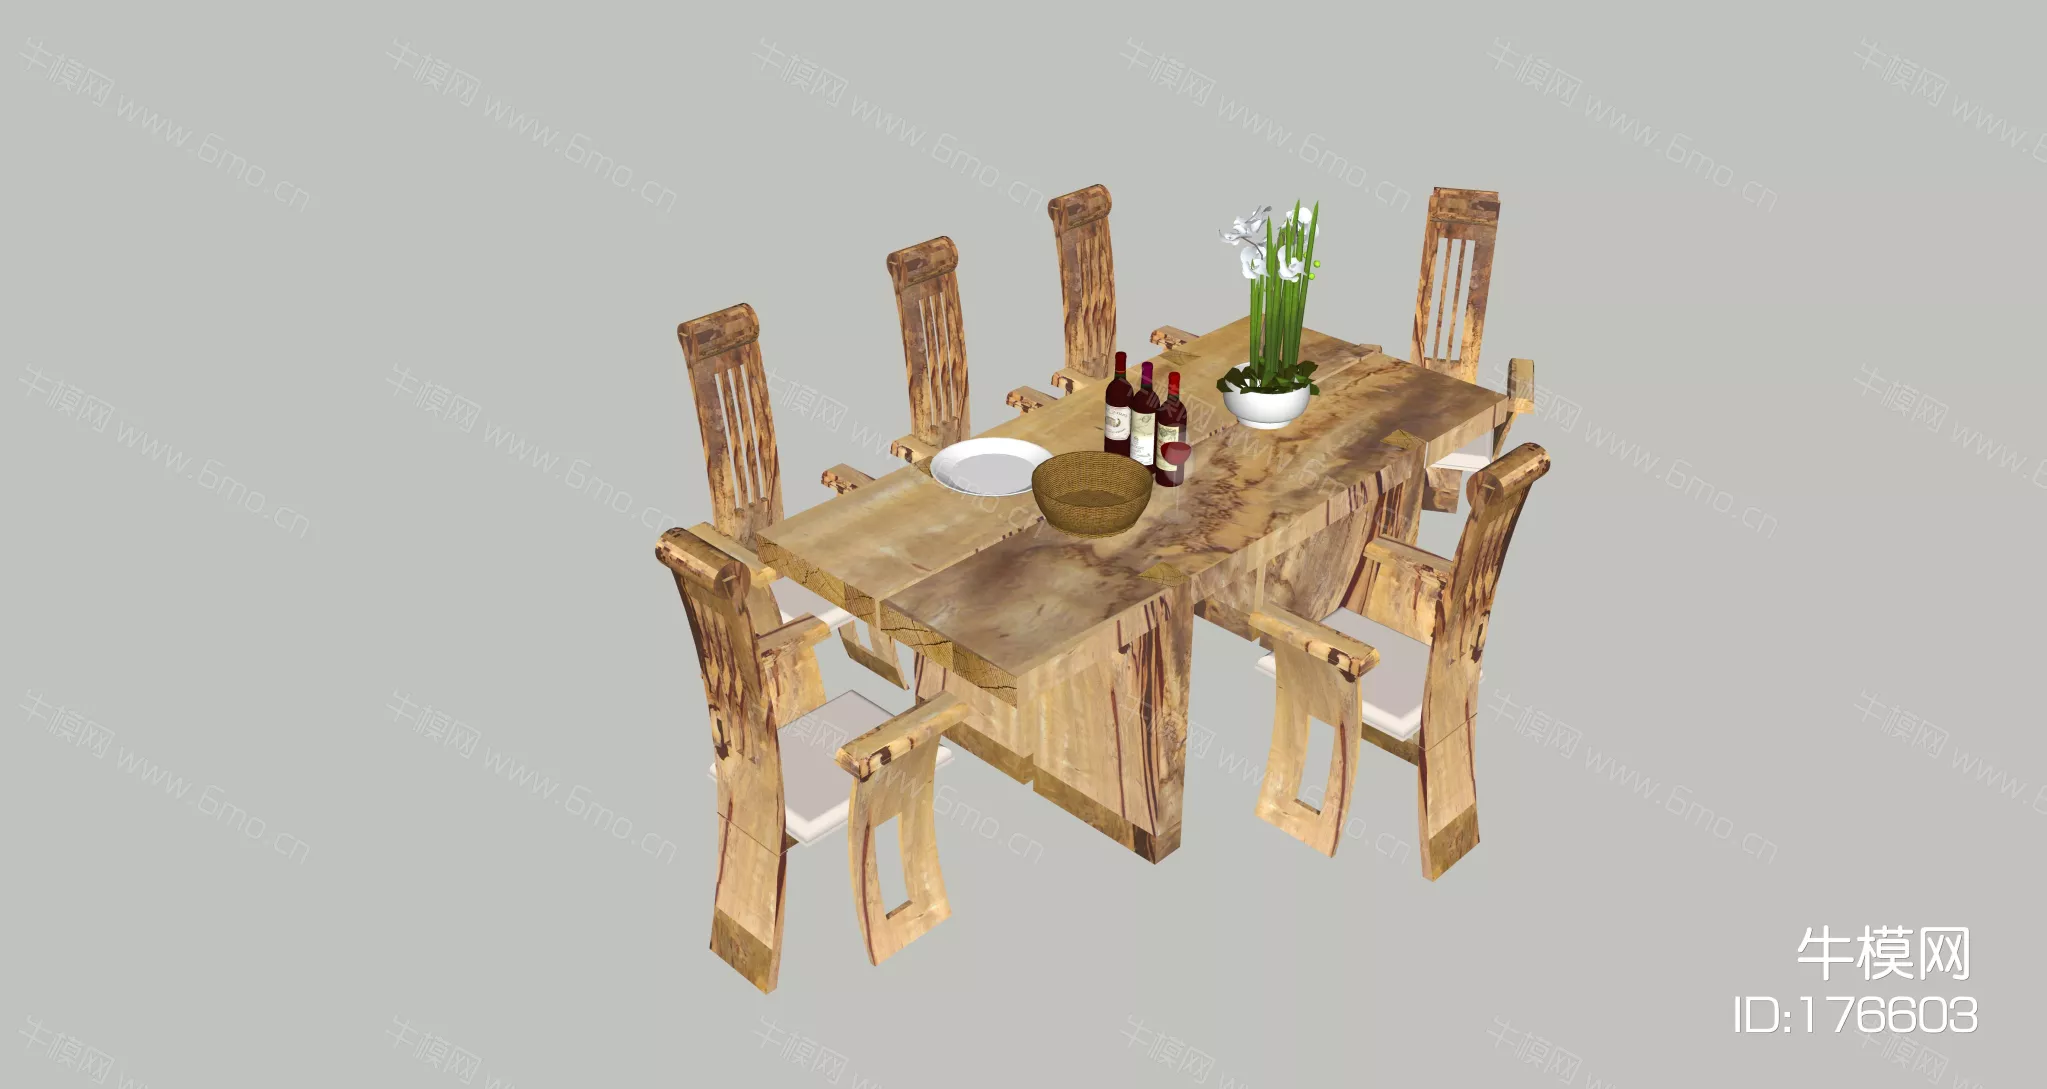 CHINESE DINING TABLE SET - SKETCHUP 3D MODEL - ENSCAPE - 176603